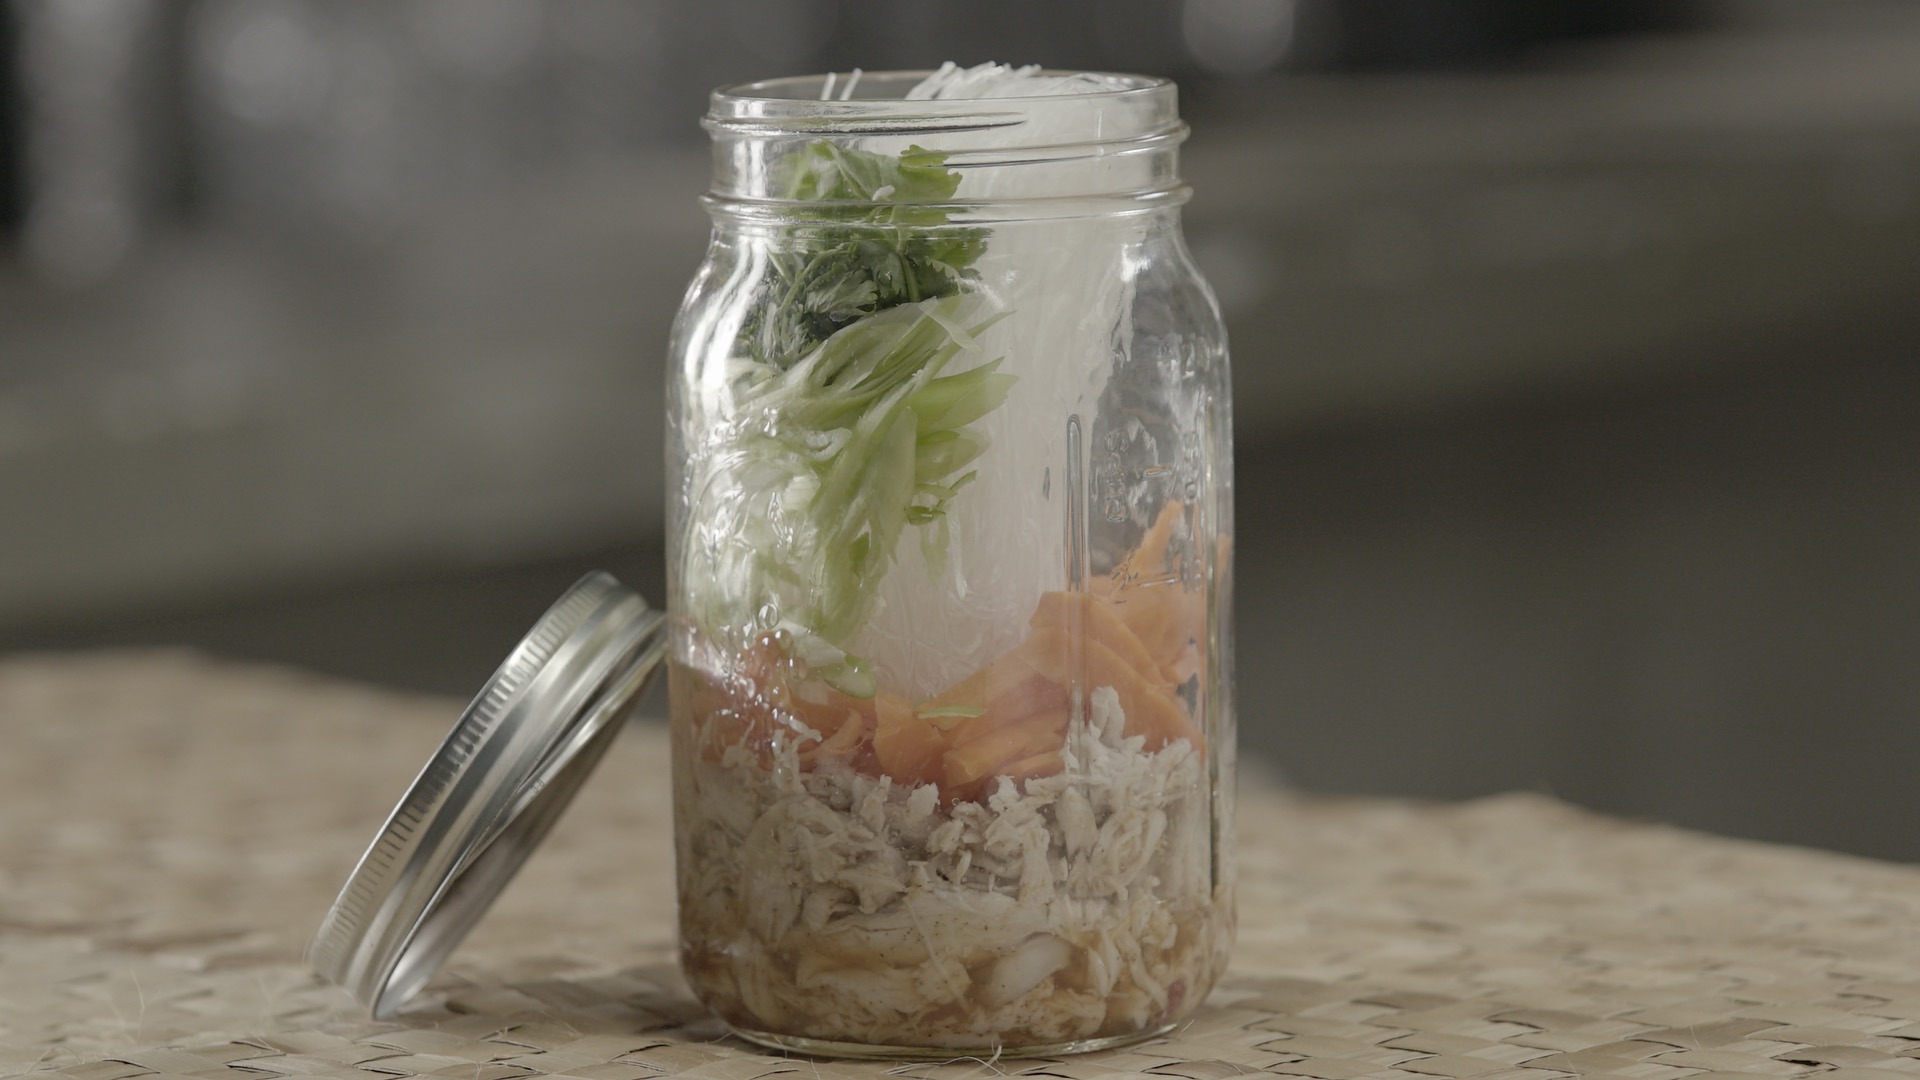 Delicious Pho Soup Made at Home in Mason Jar Recipe